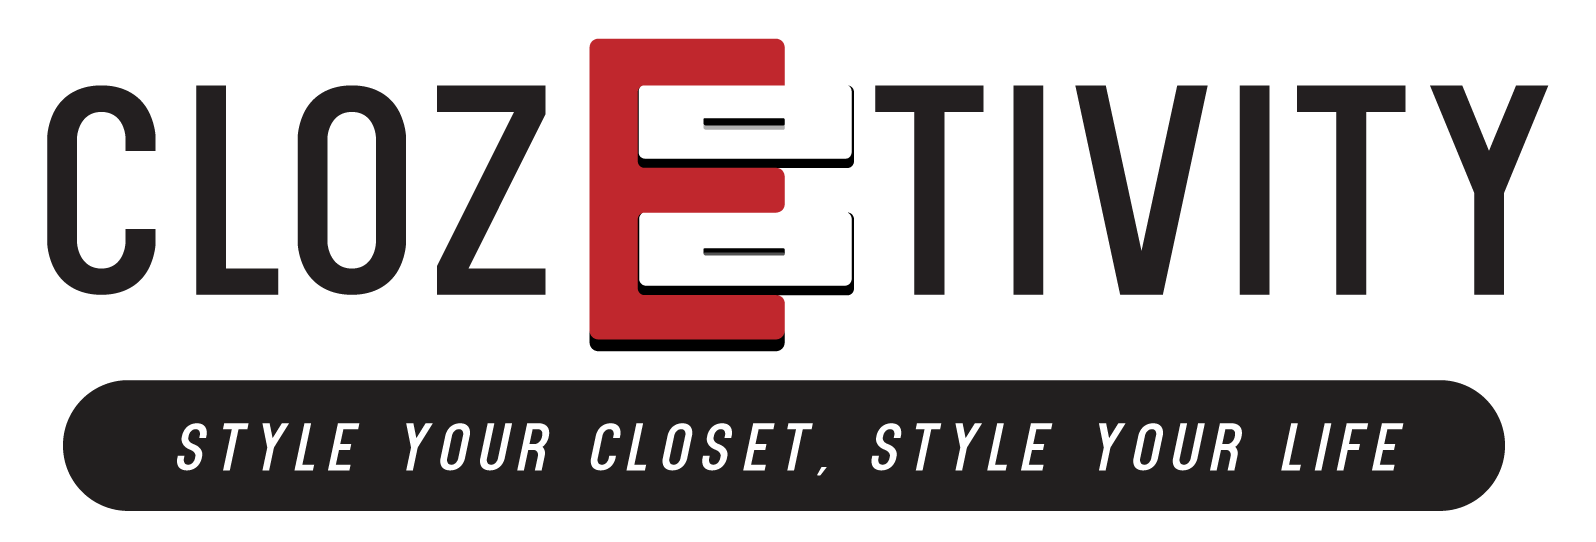 Expert Custom Closet and
Cabinet Makers in South Central, PA